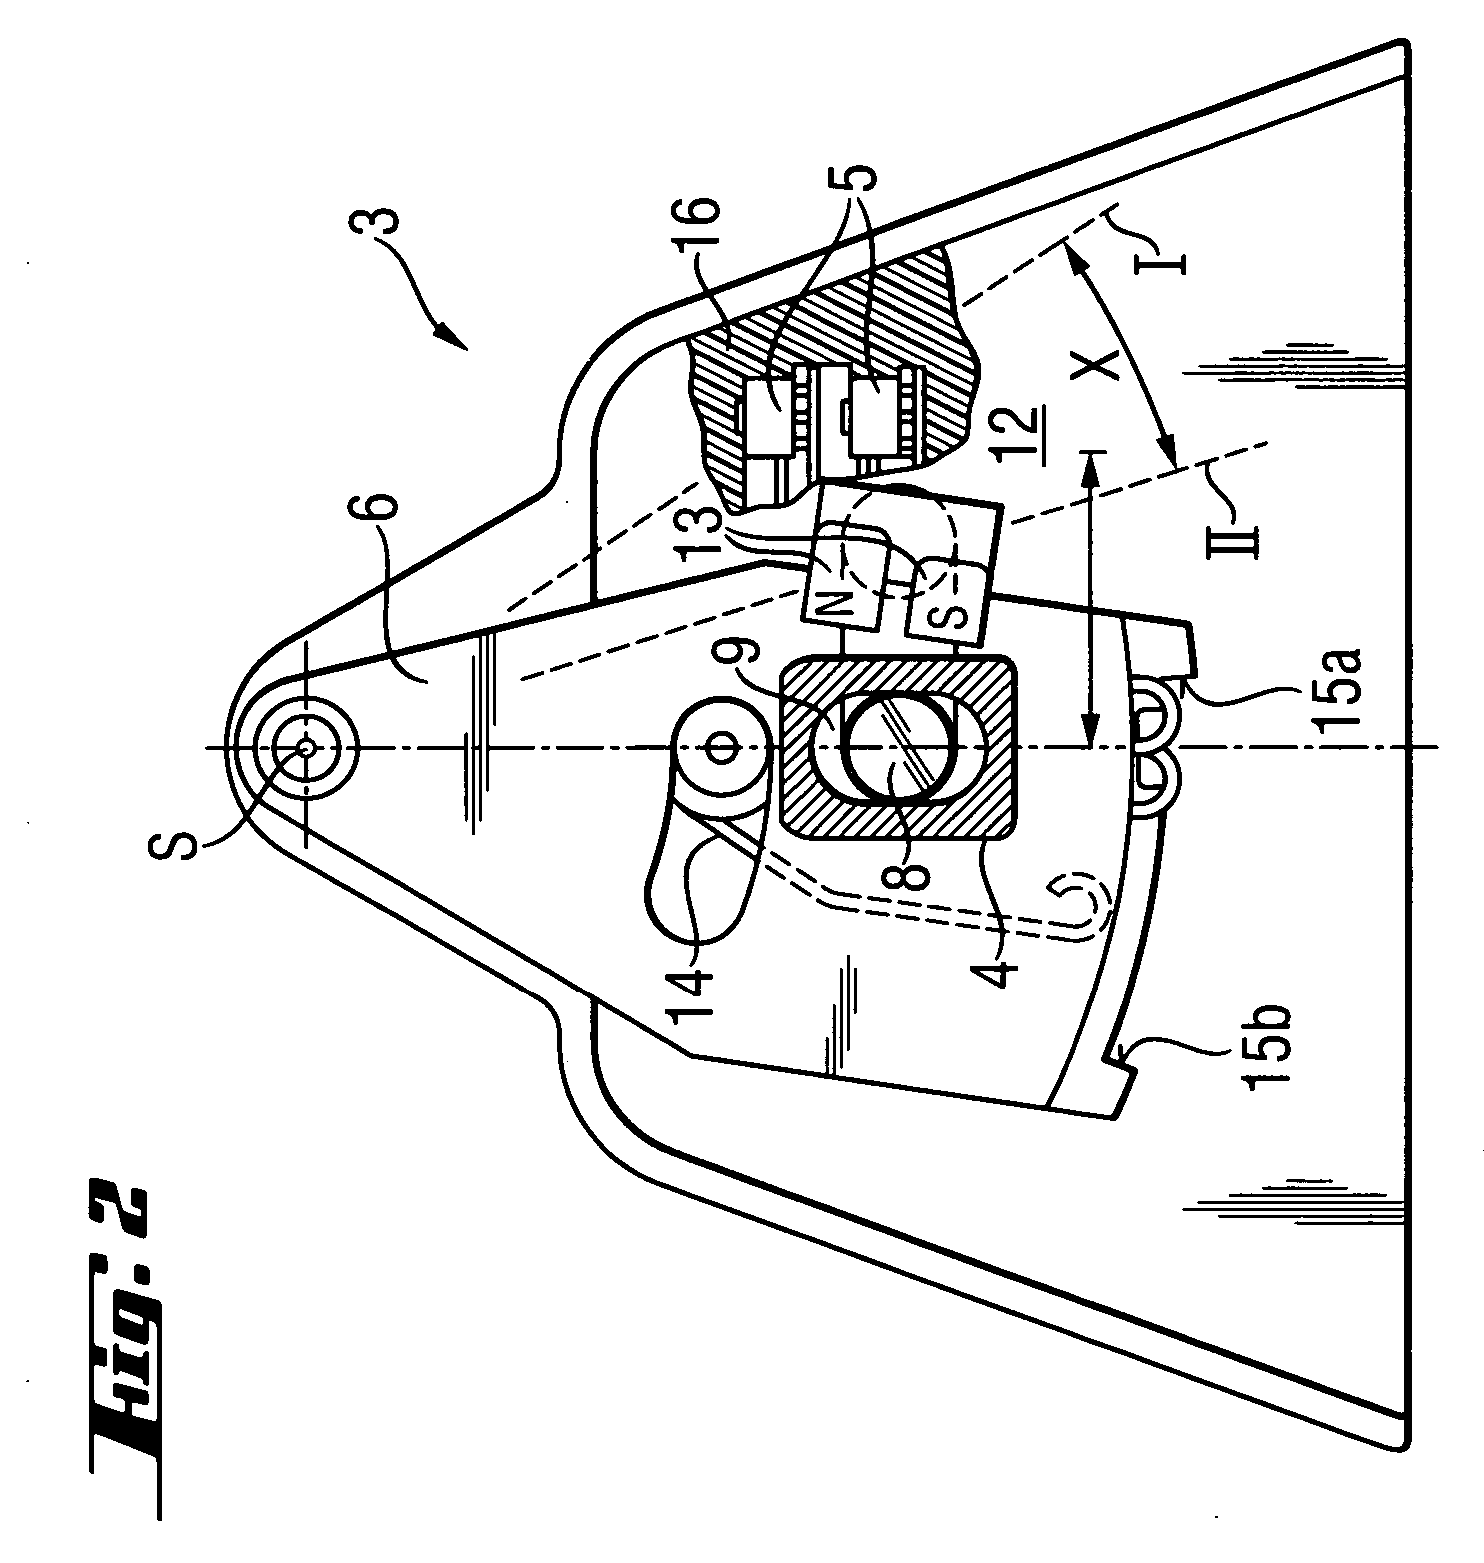 Electrical hand-held power tool with non-contacting electrical manual control switch